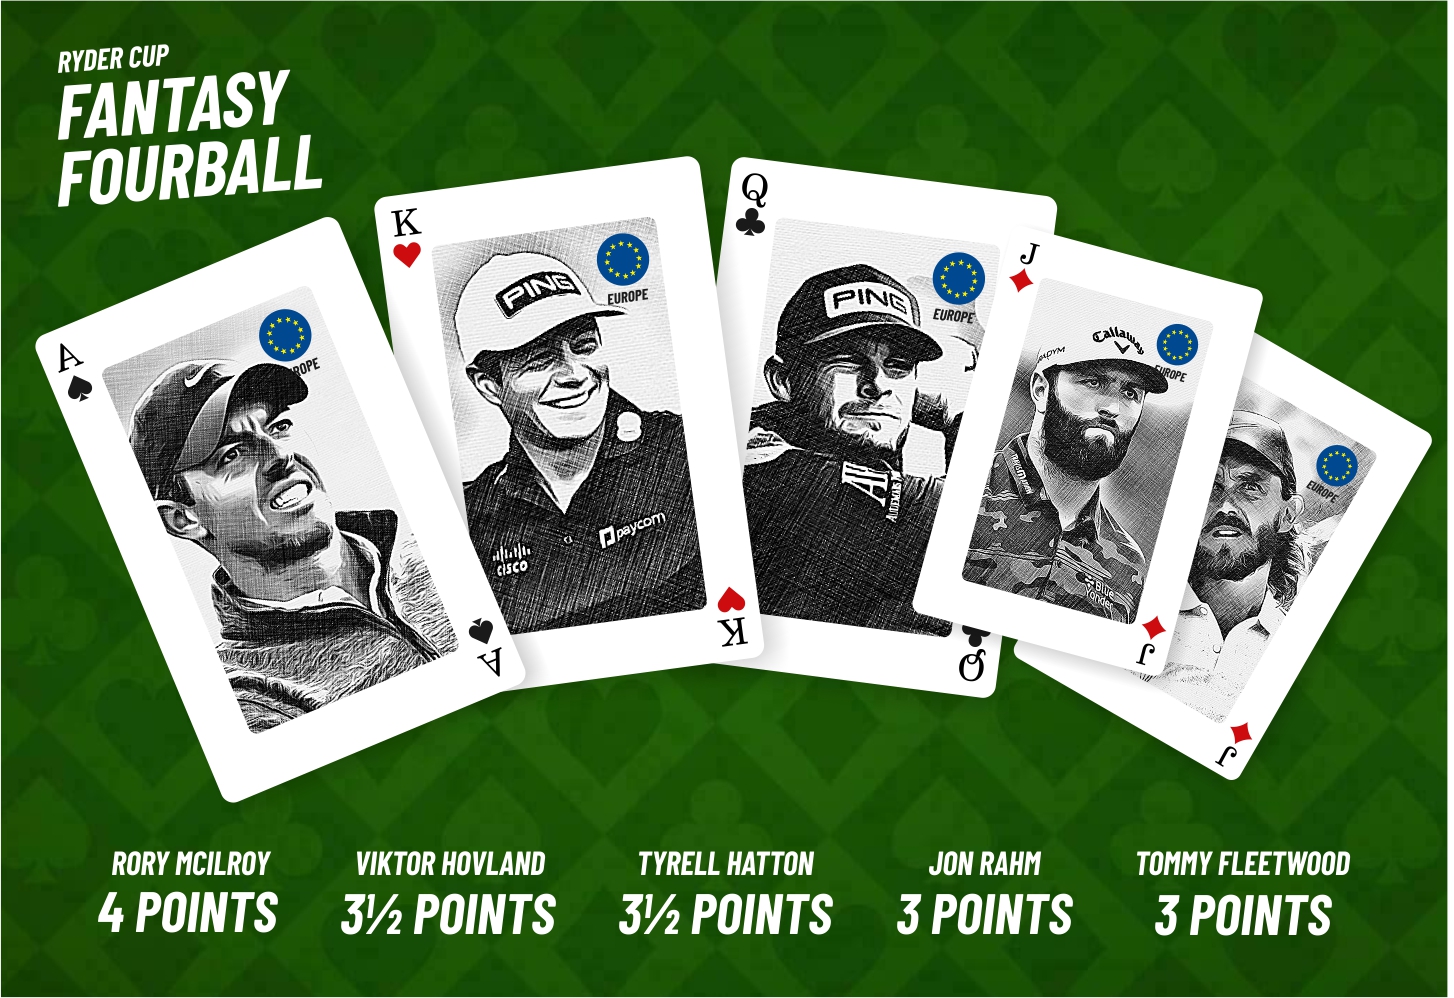 Did you pick the winning Ryder Cup Fantasy Fourball?